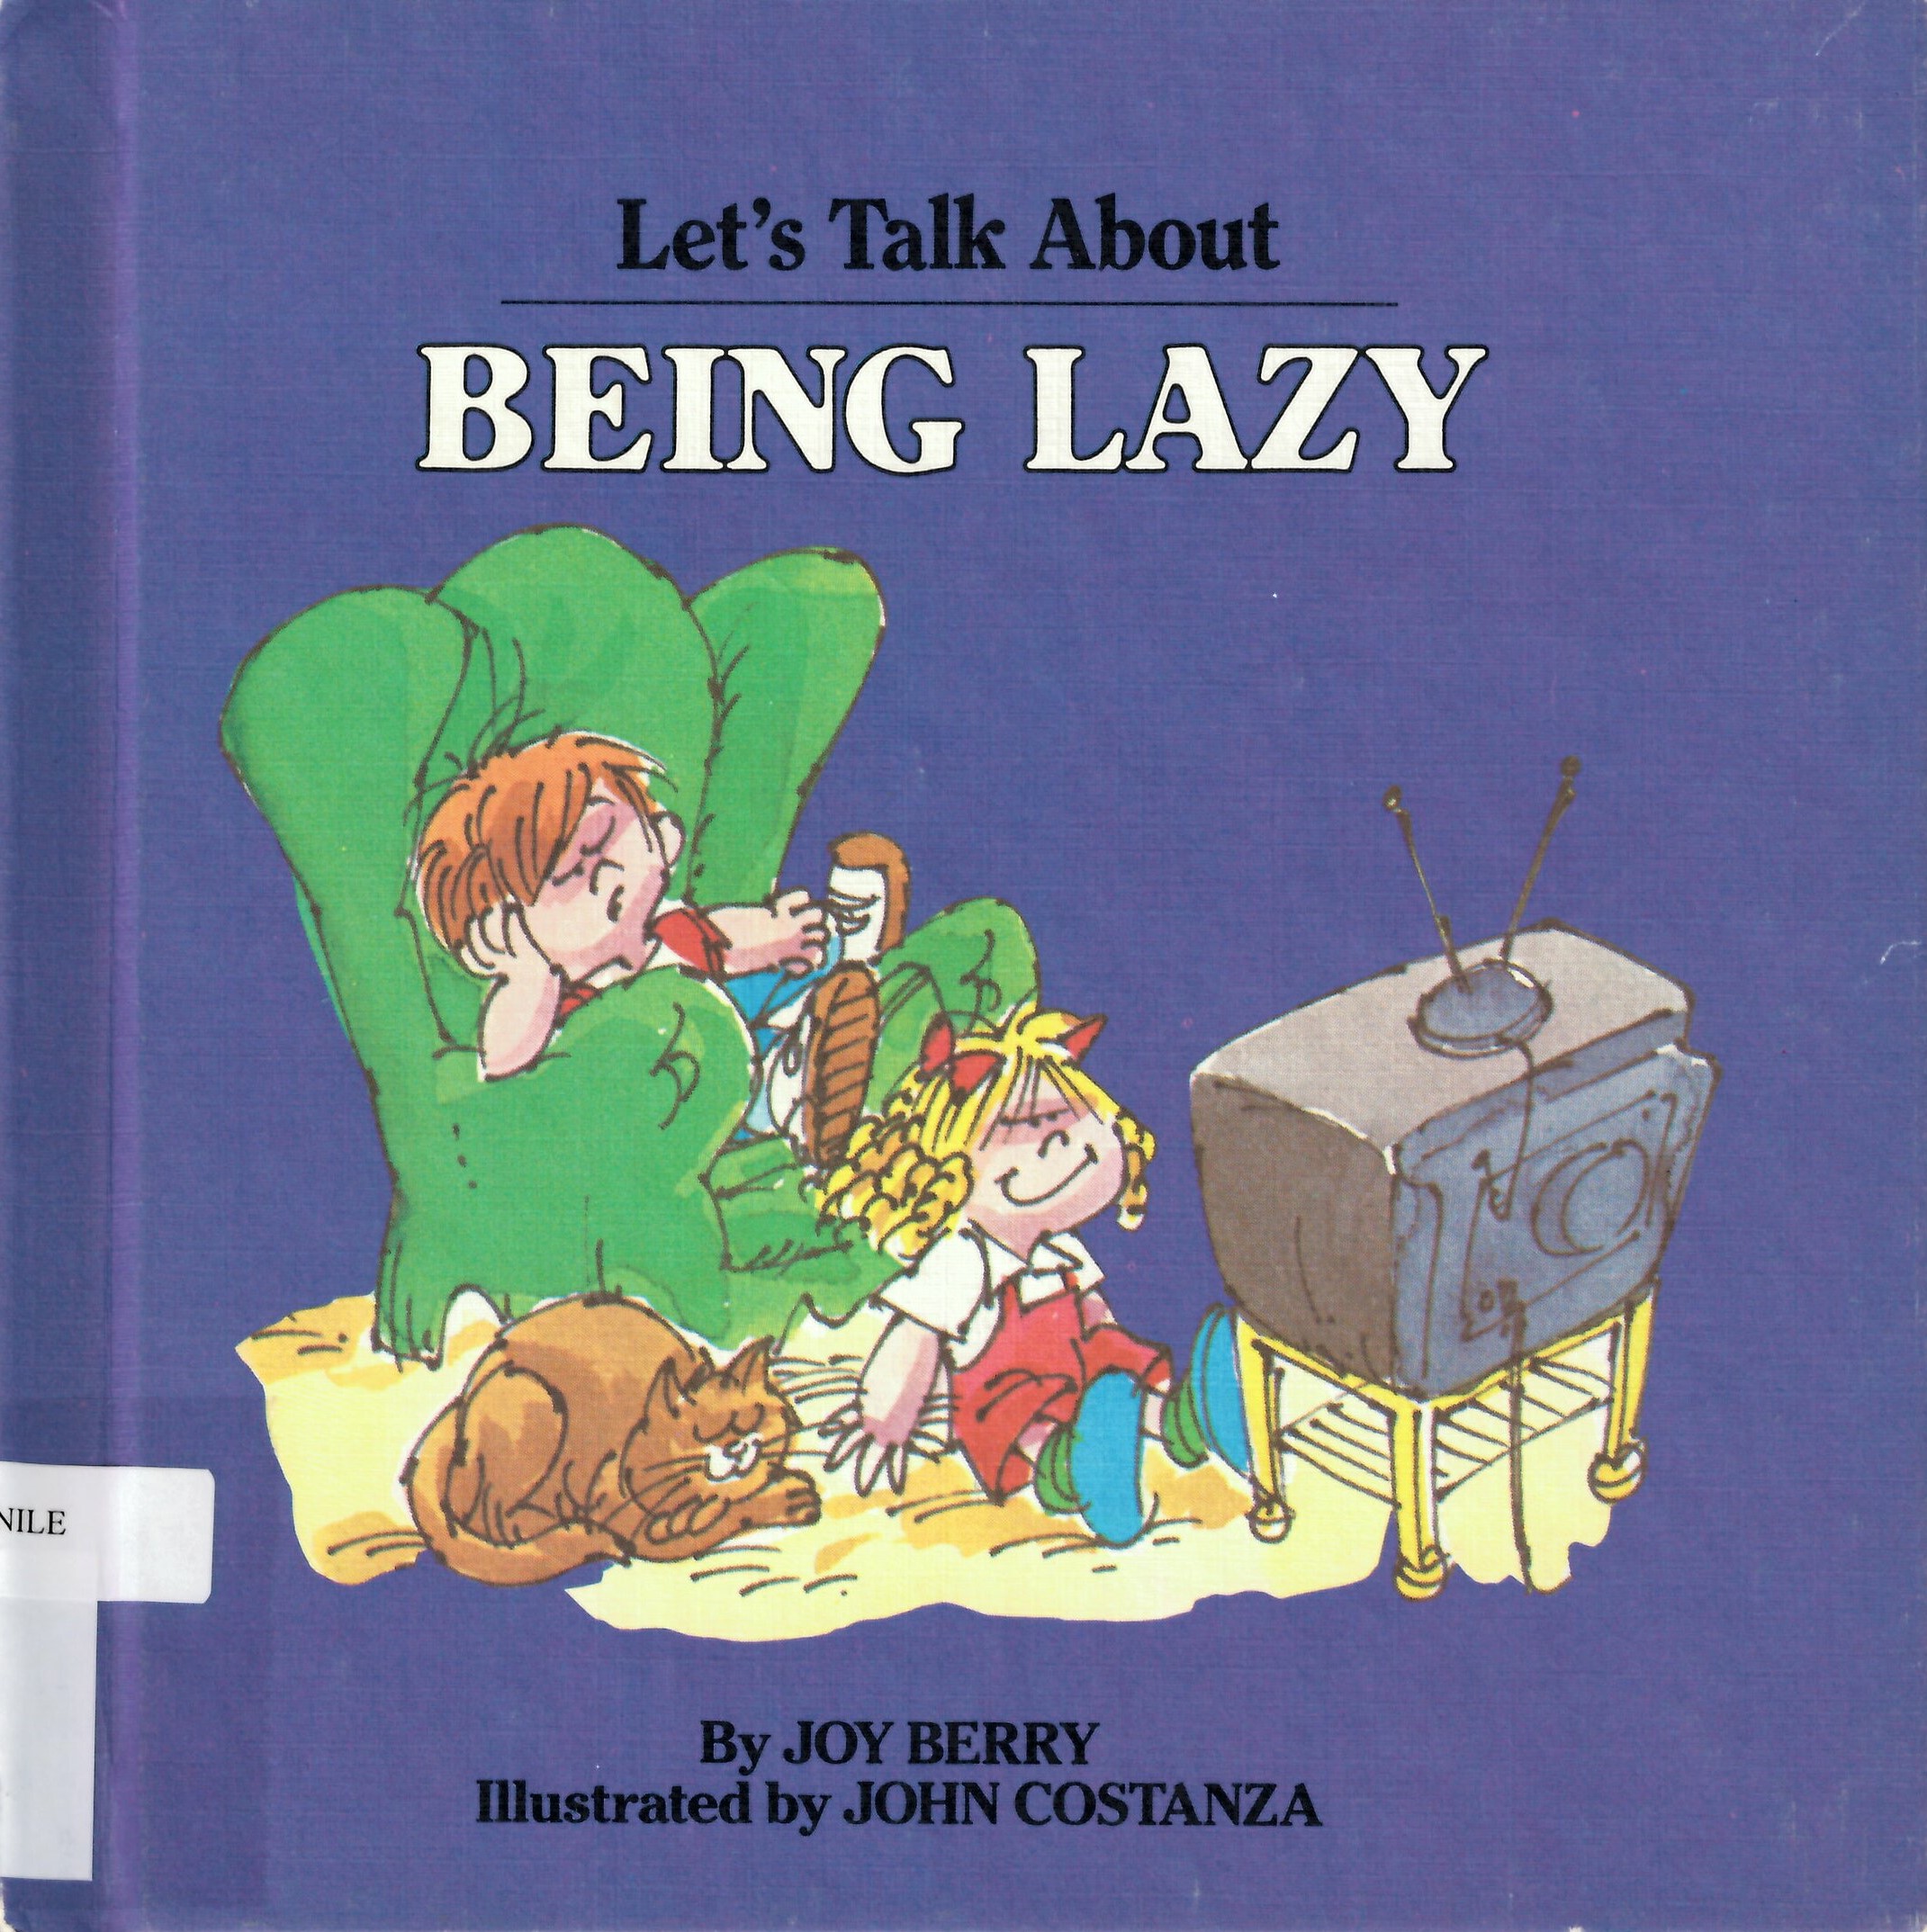 Let's talk about being lazy